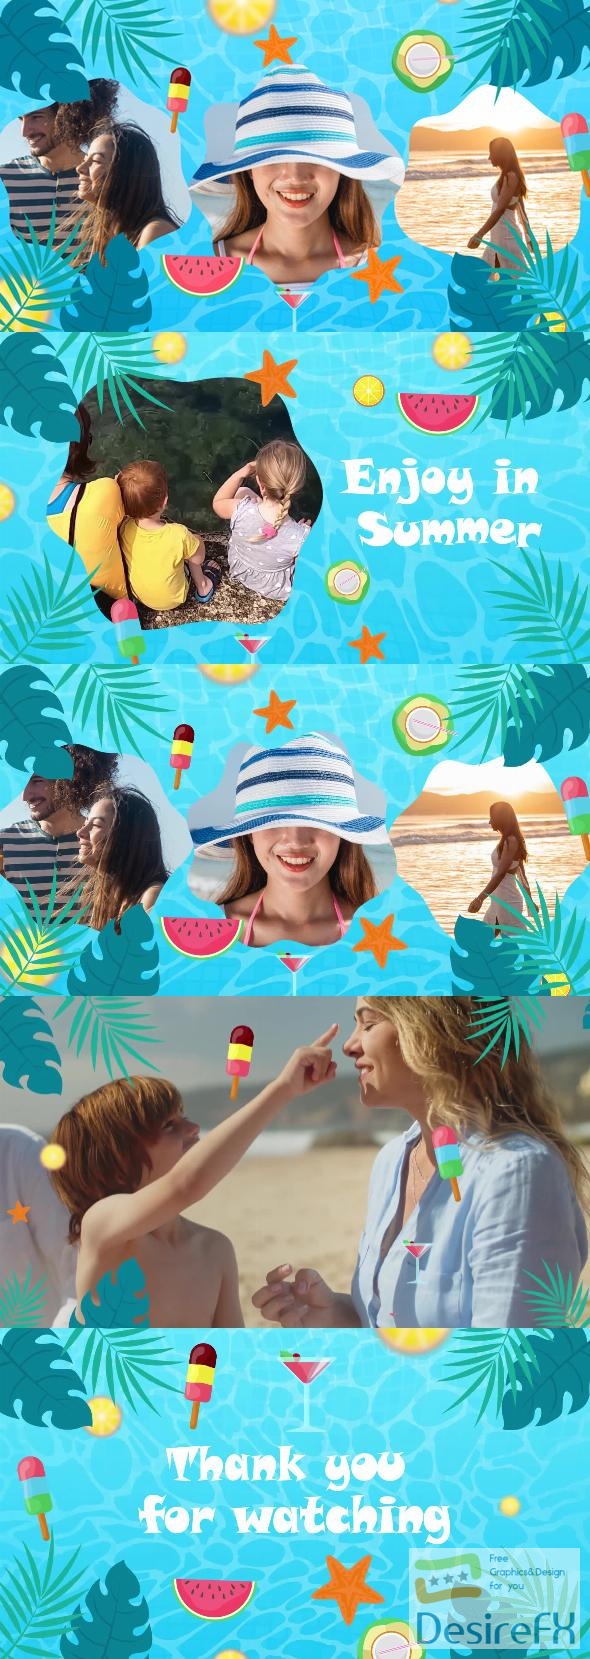 VideoHive Summer Holiday 46831444